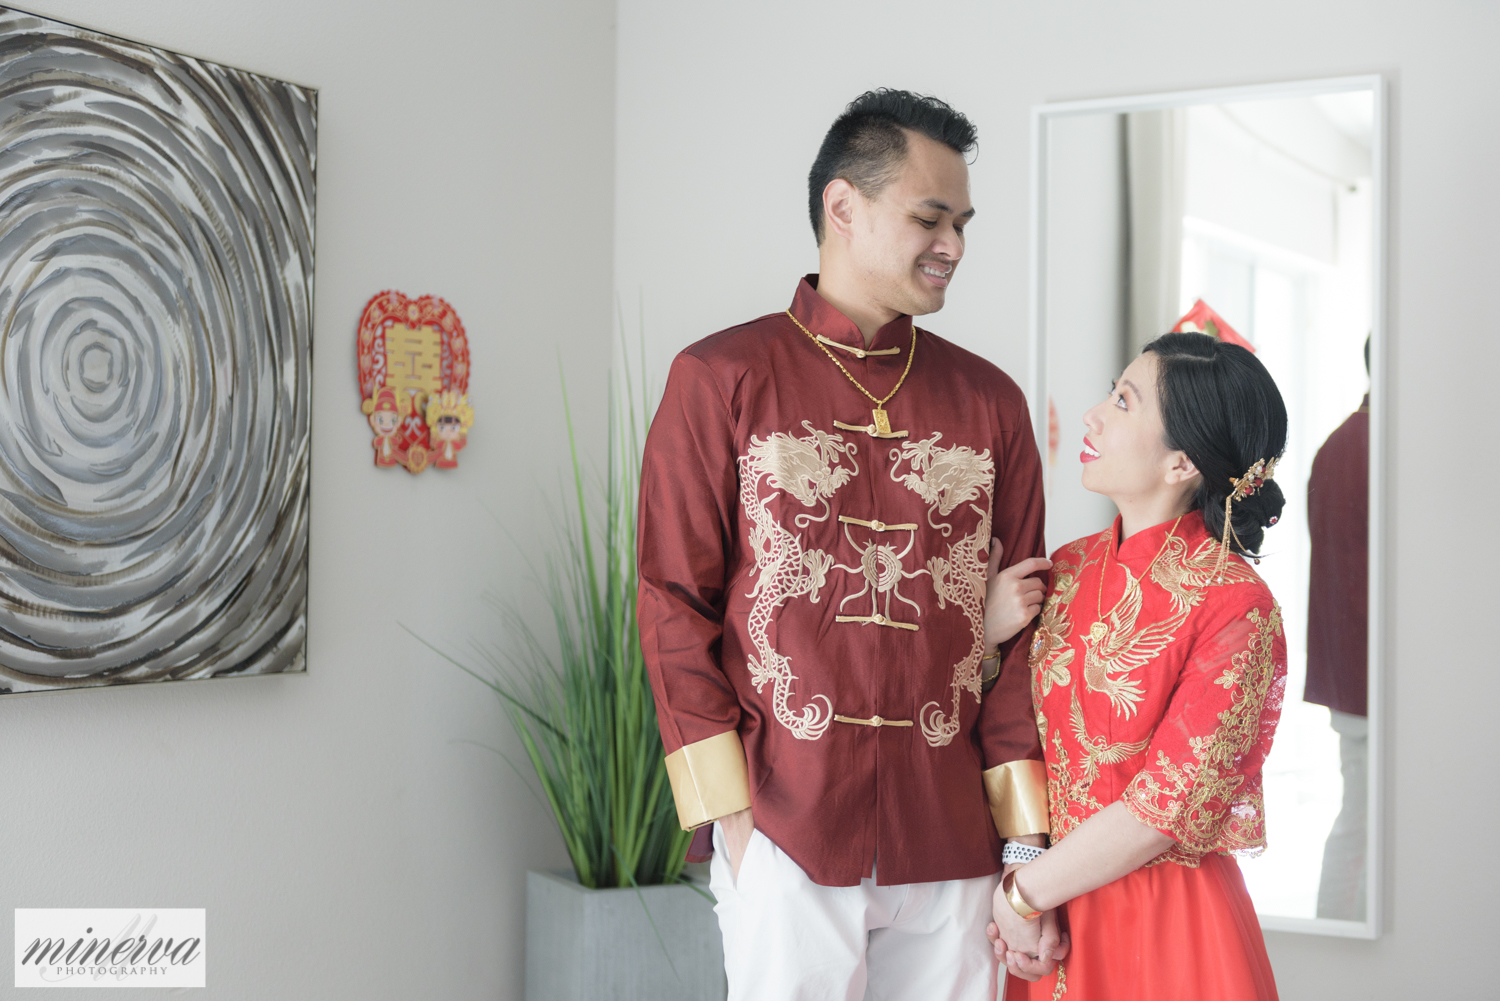 063_chinese-tea-ceremony_red-dress_four-seasons-resort-orlando_walt-disney-world_wedding_first-look_staircase_central-florida-photographer_luxury-photography